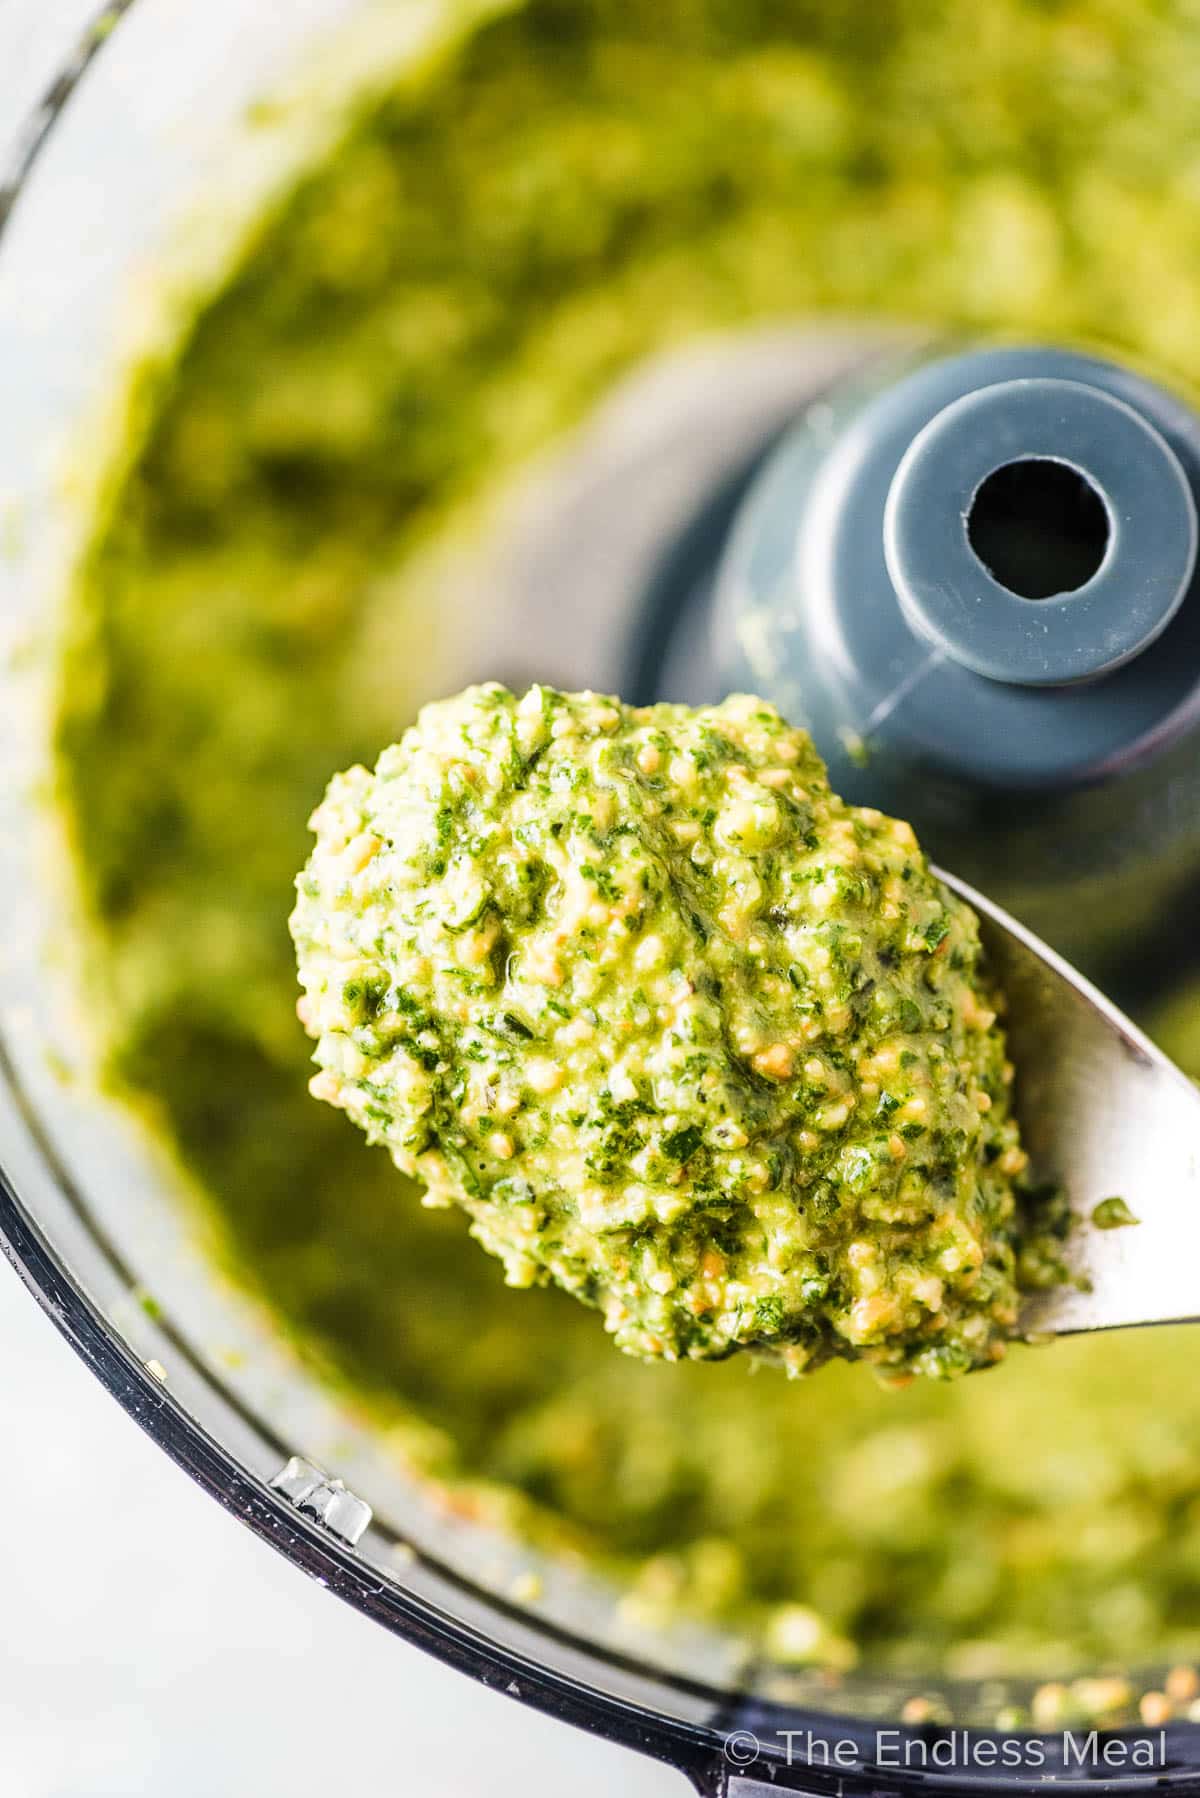 A spoonful of dairy free pesto scooped out of the food processor.